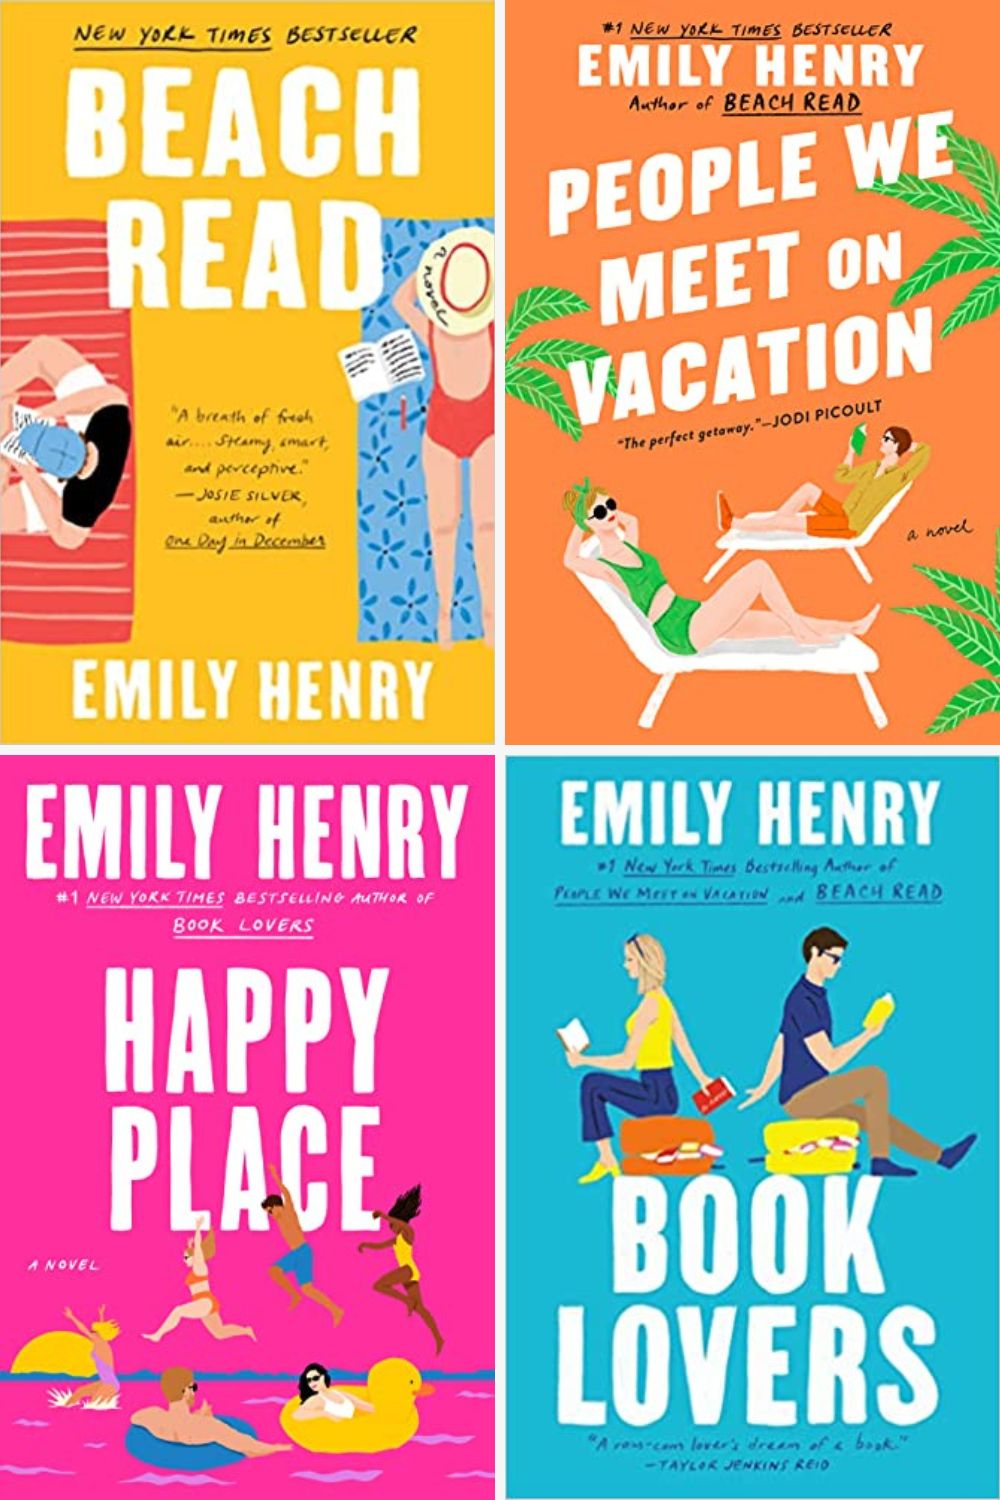 Emily Henry Books In Order: The Complete List